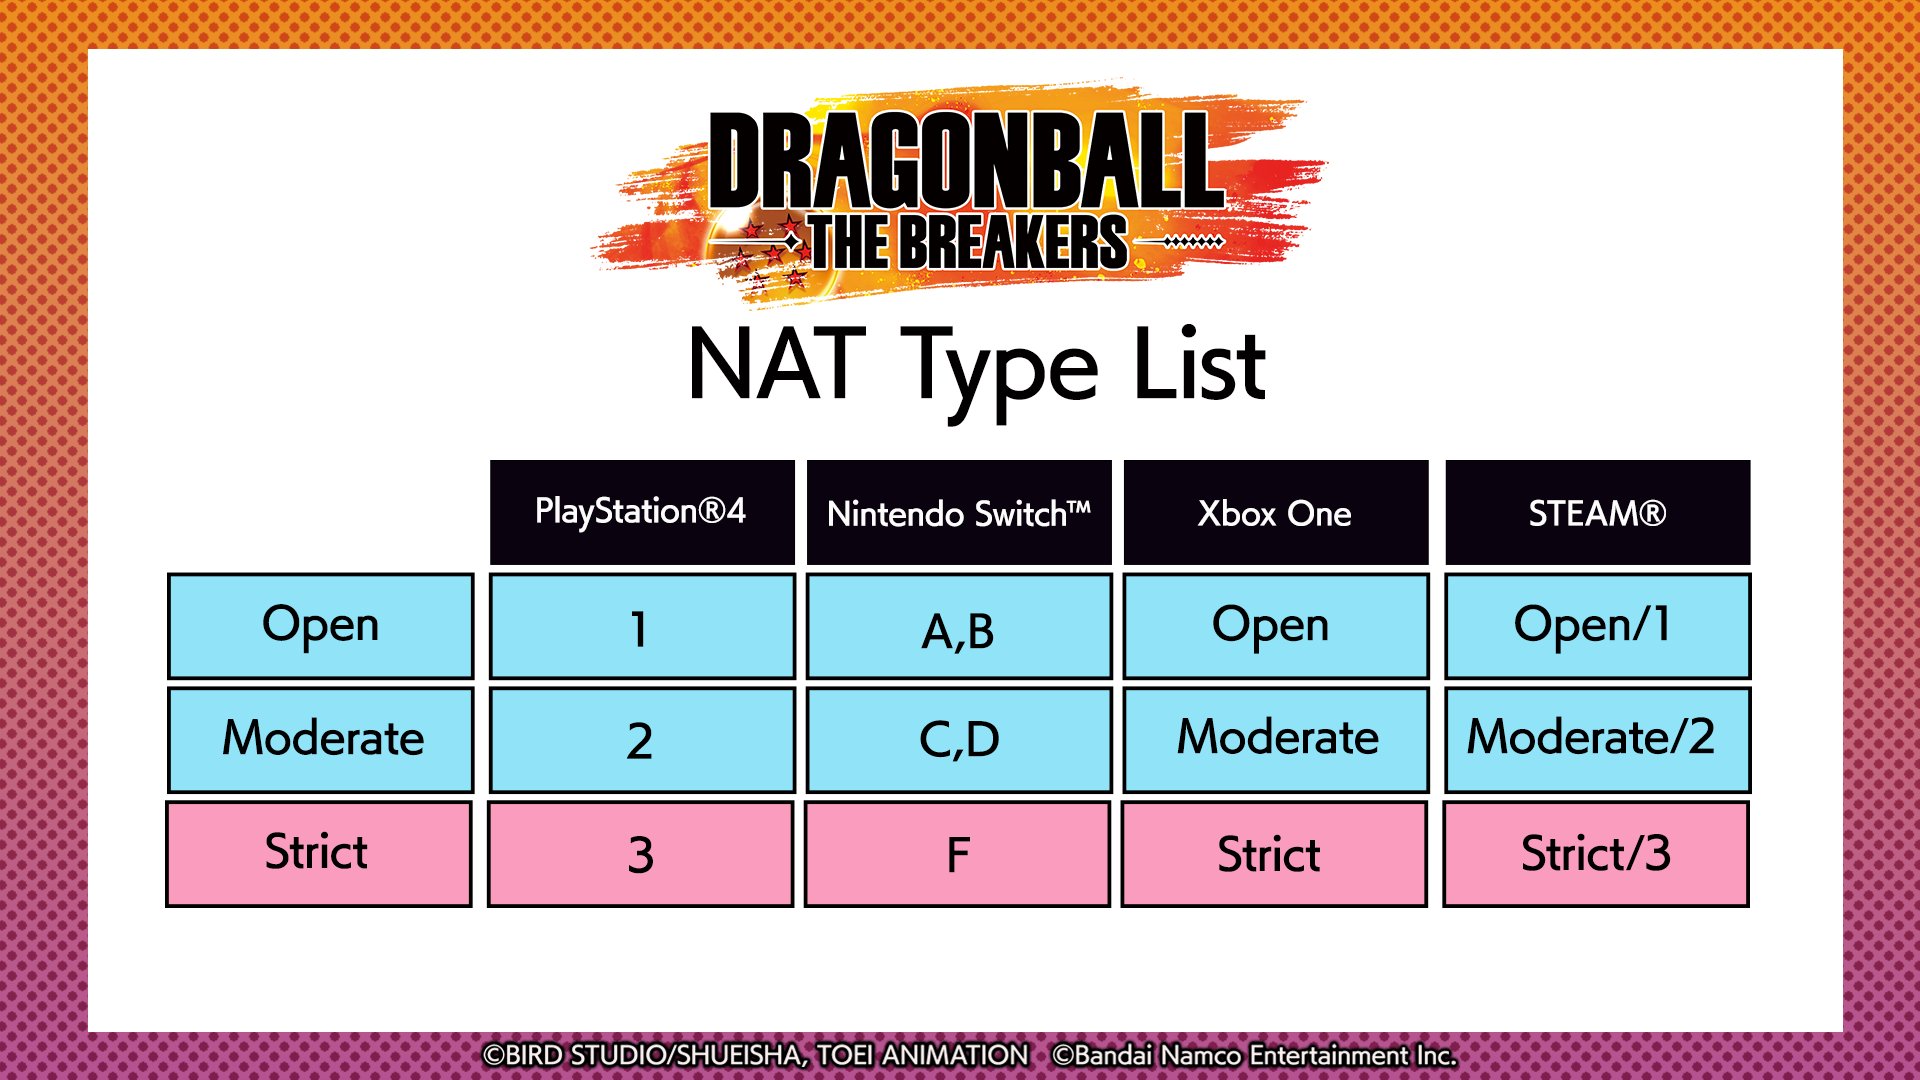 Dragon Ball: The on Twitter: "For a smooth online experience, we recommend Open NAT or moderate NAT. Please note if your NAT type is you may not be